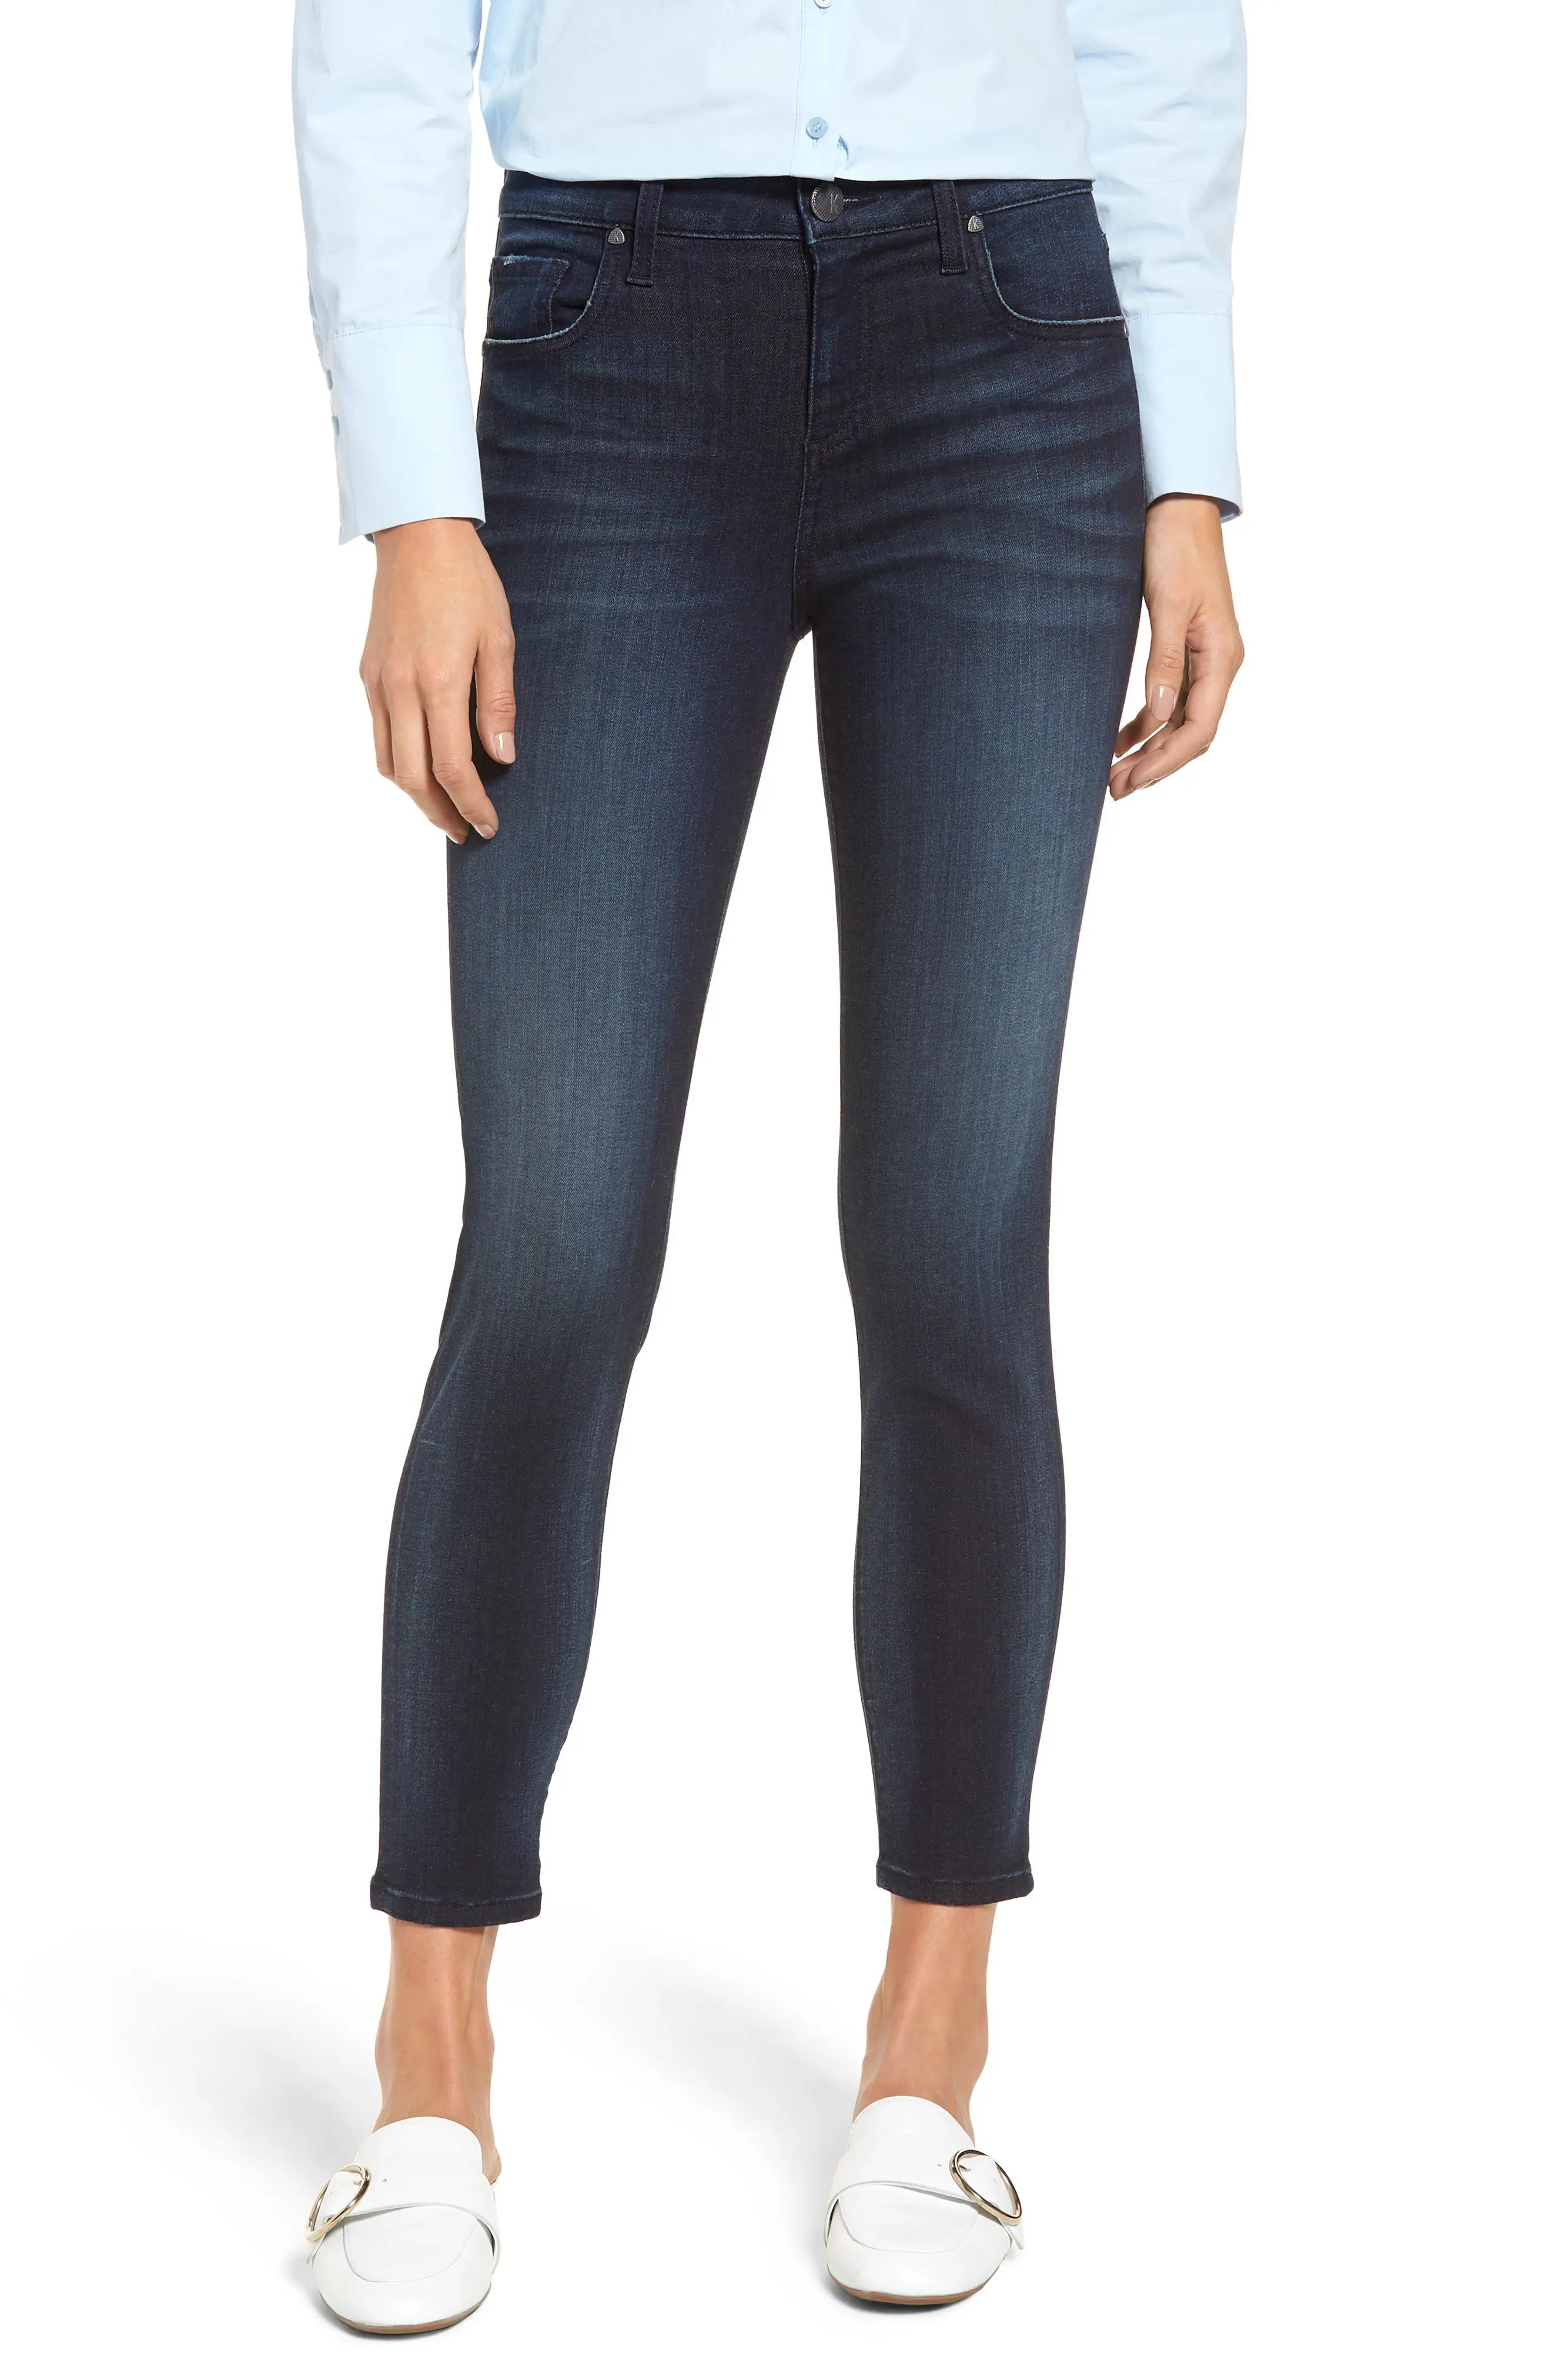 Kut from the Kloth Donna Ankle Skinny Jeans (Formidable) (Regular & Petite) | Nordstrom